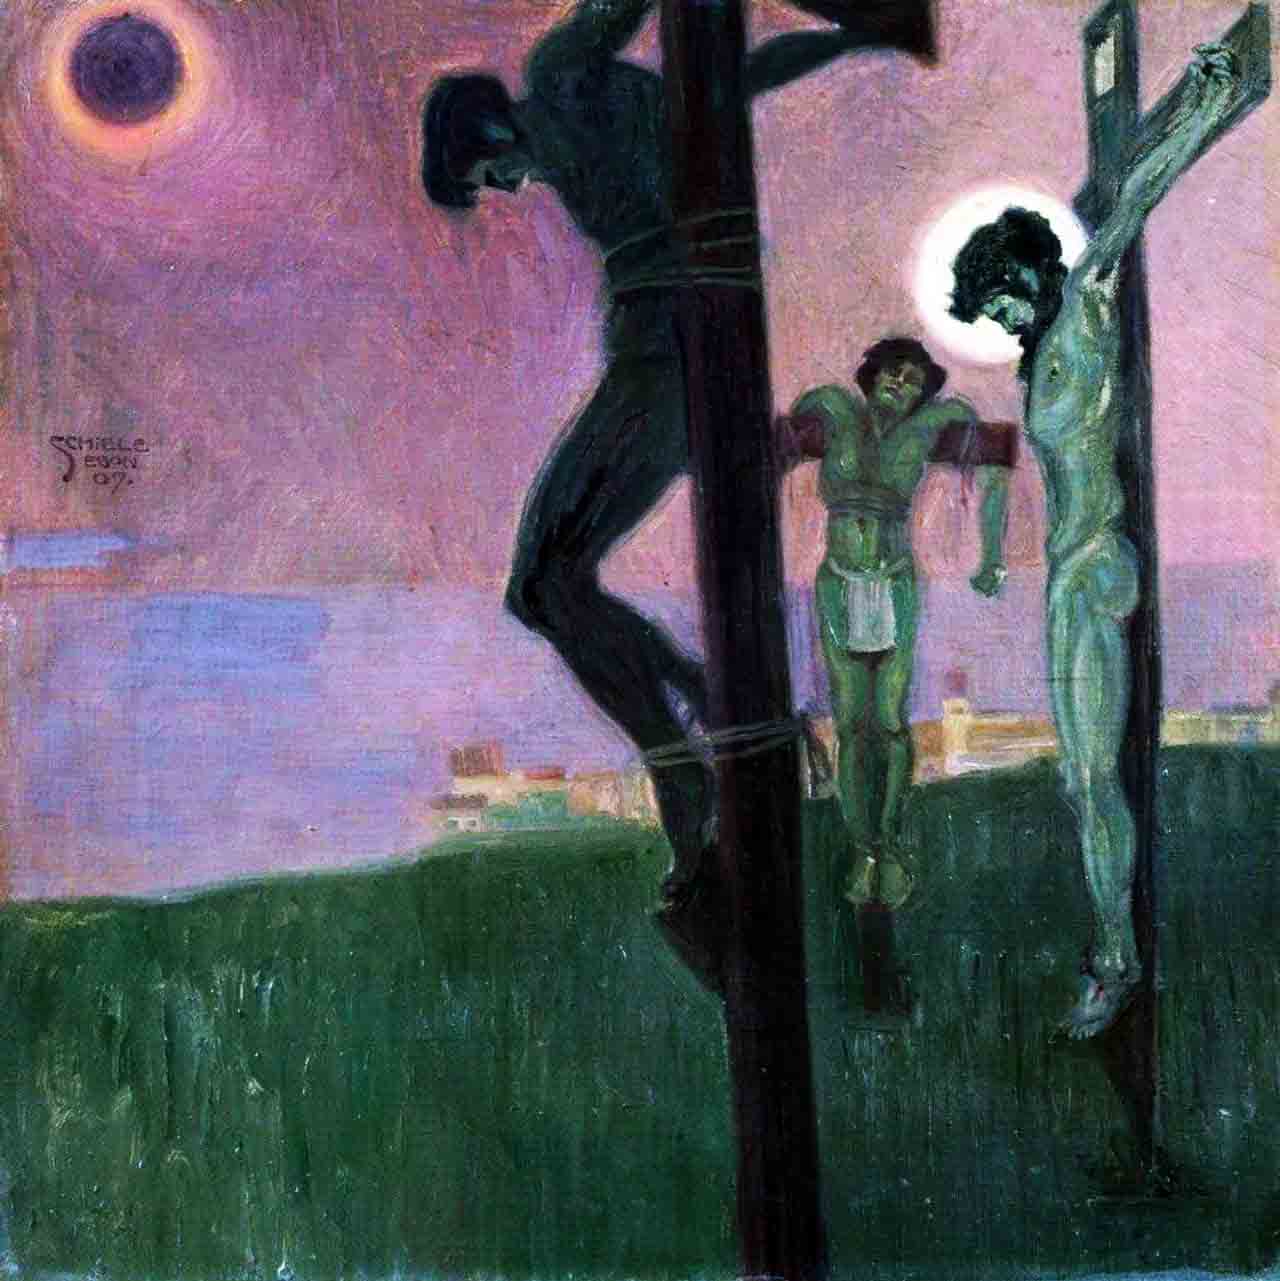 Painting Of The Eclipse And Crucifixion